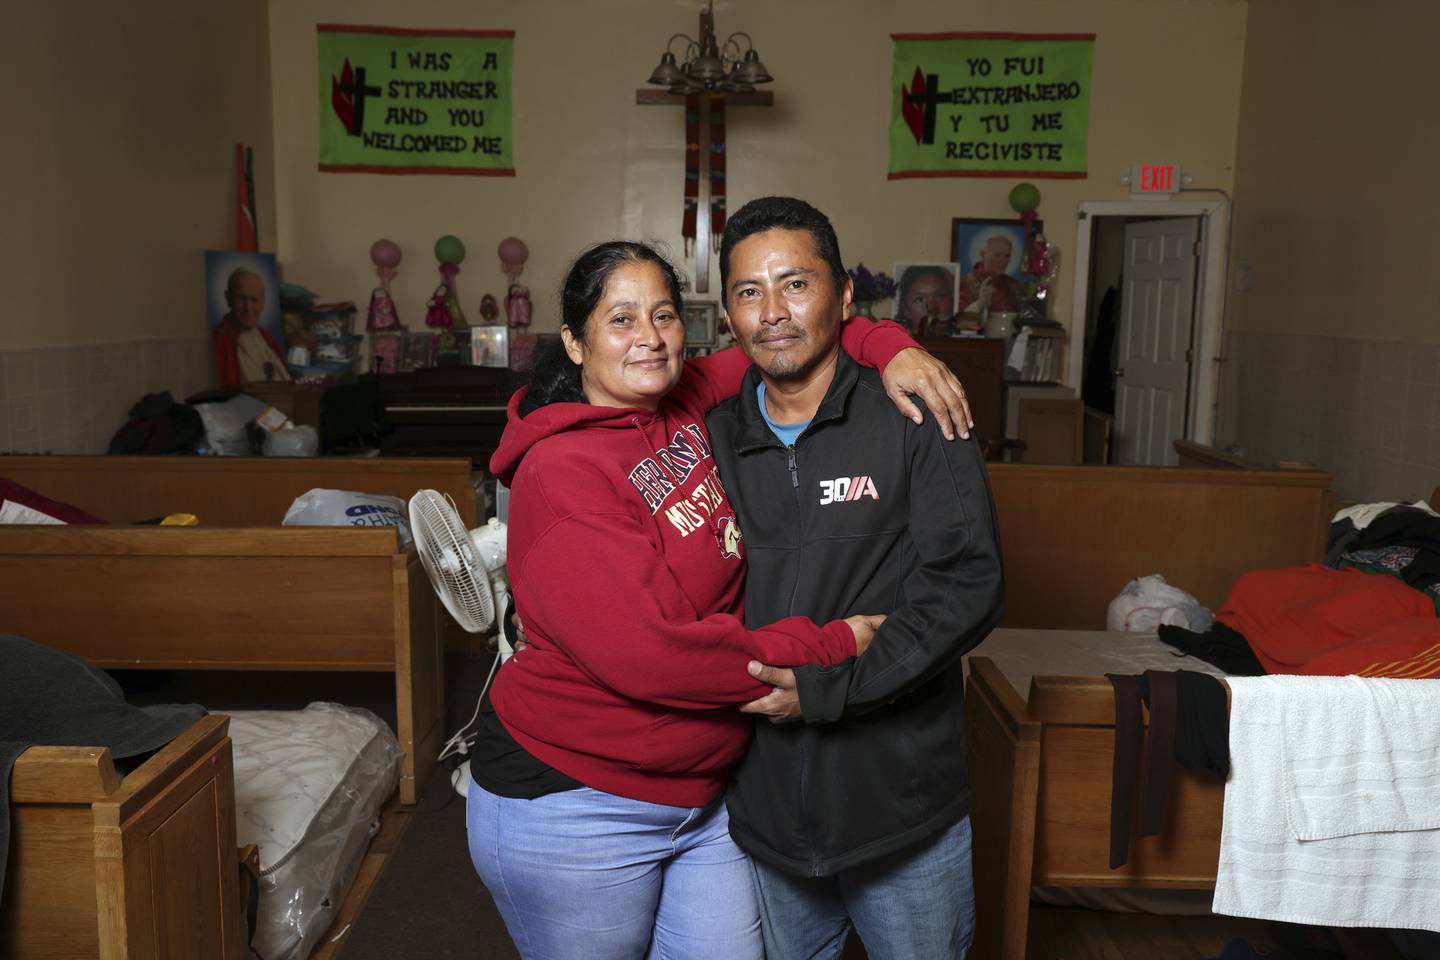 Marianella Hernandez, 47, left, and her husband Manolo Francisco Palma, 43, have three adult children and some grandchildren in the U.S. The family had a vegetable and fruit business in Venezuela for many years, but after the pandemic it slowed down drastically, forcing the family to migrate north. 